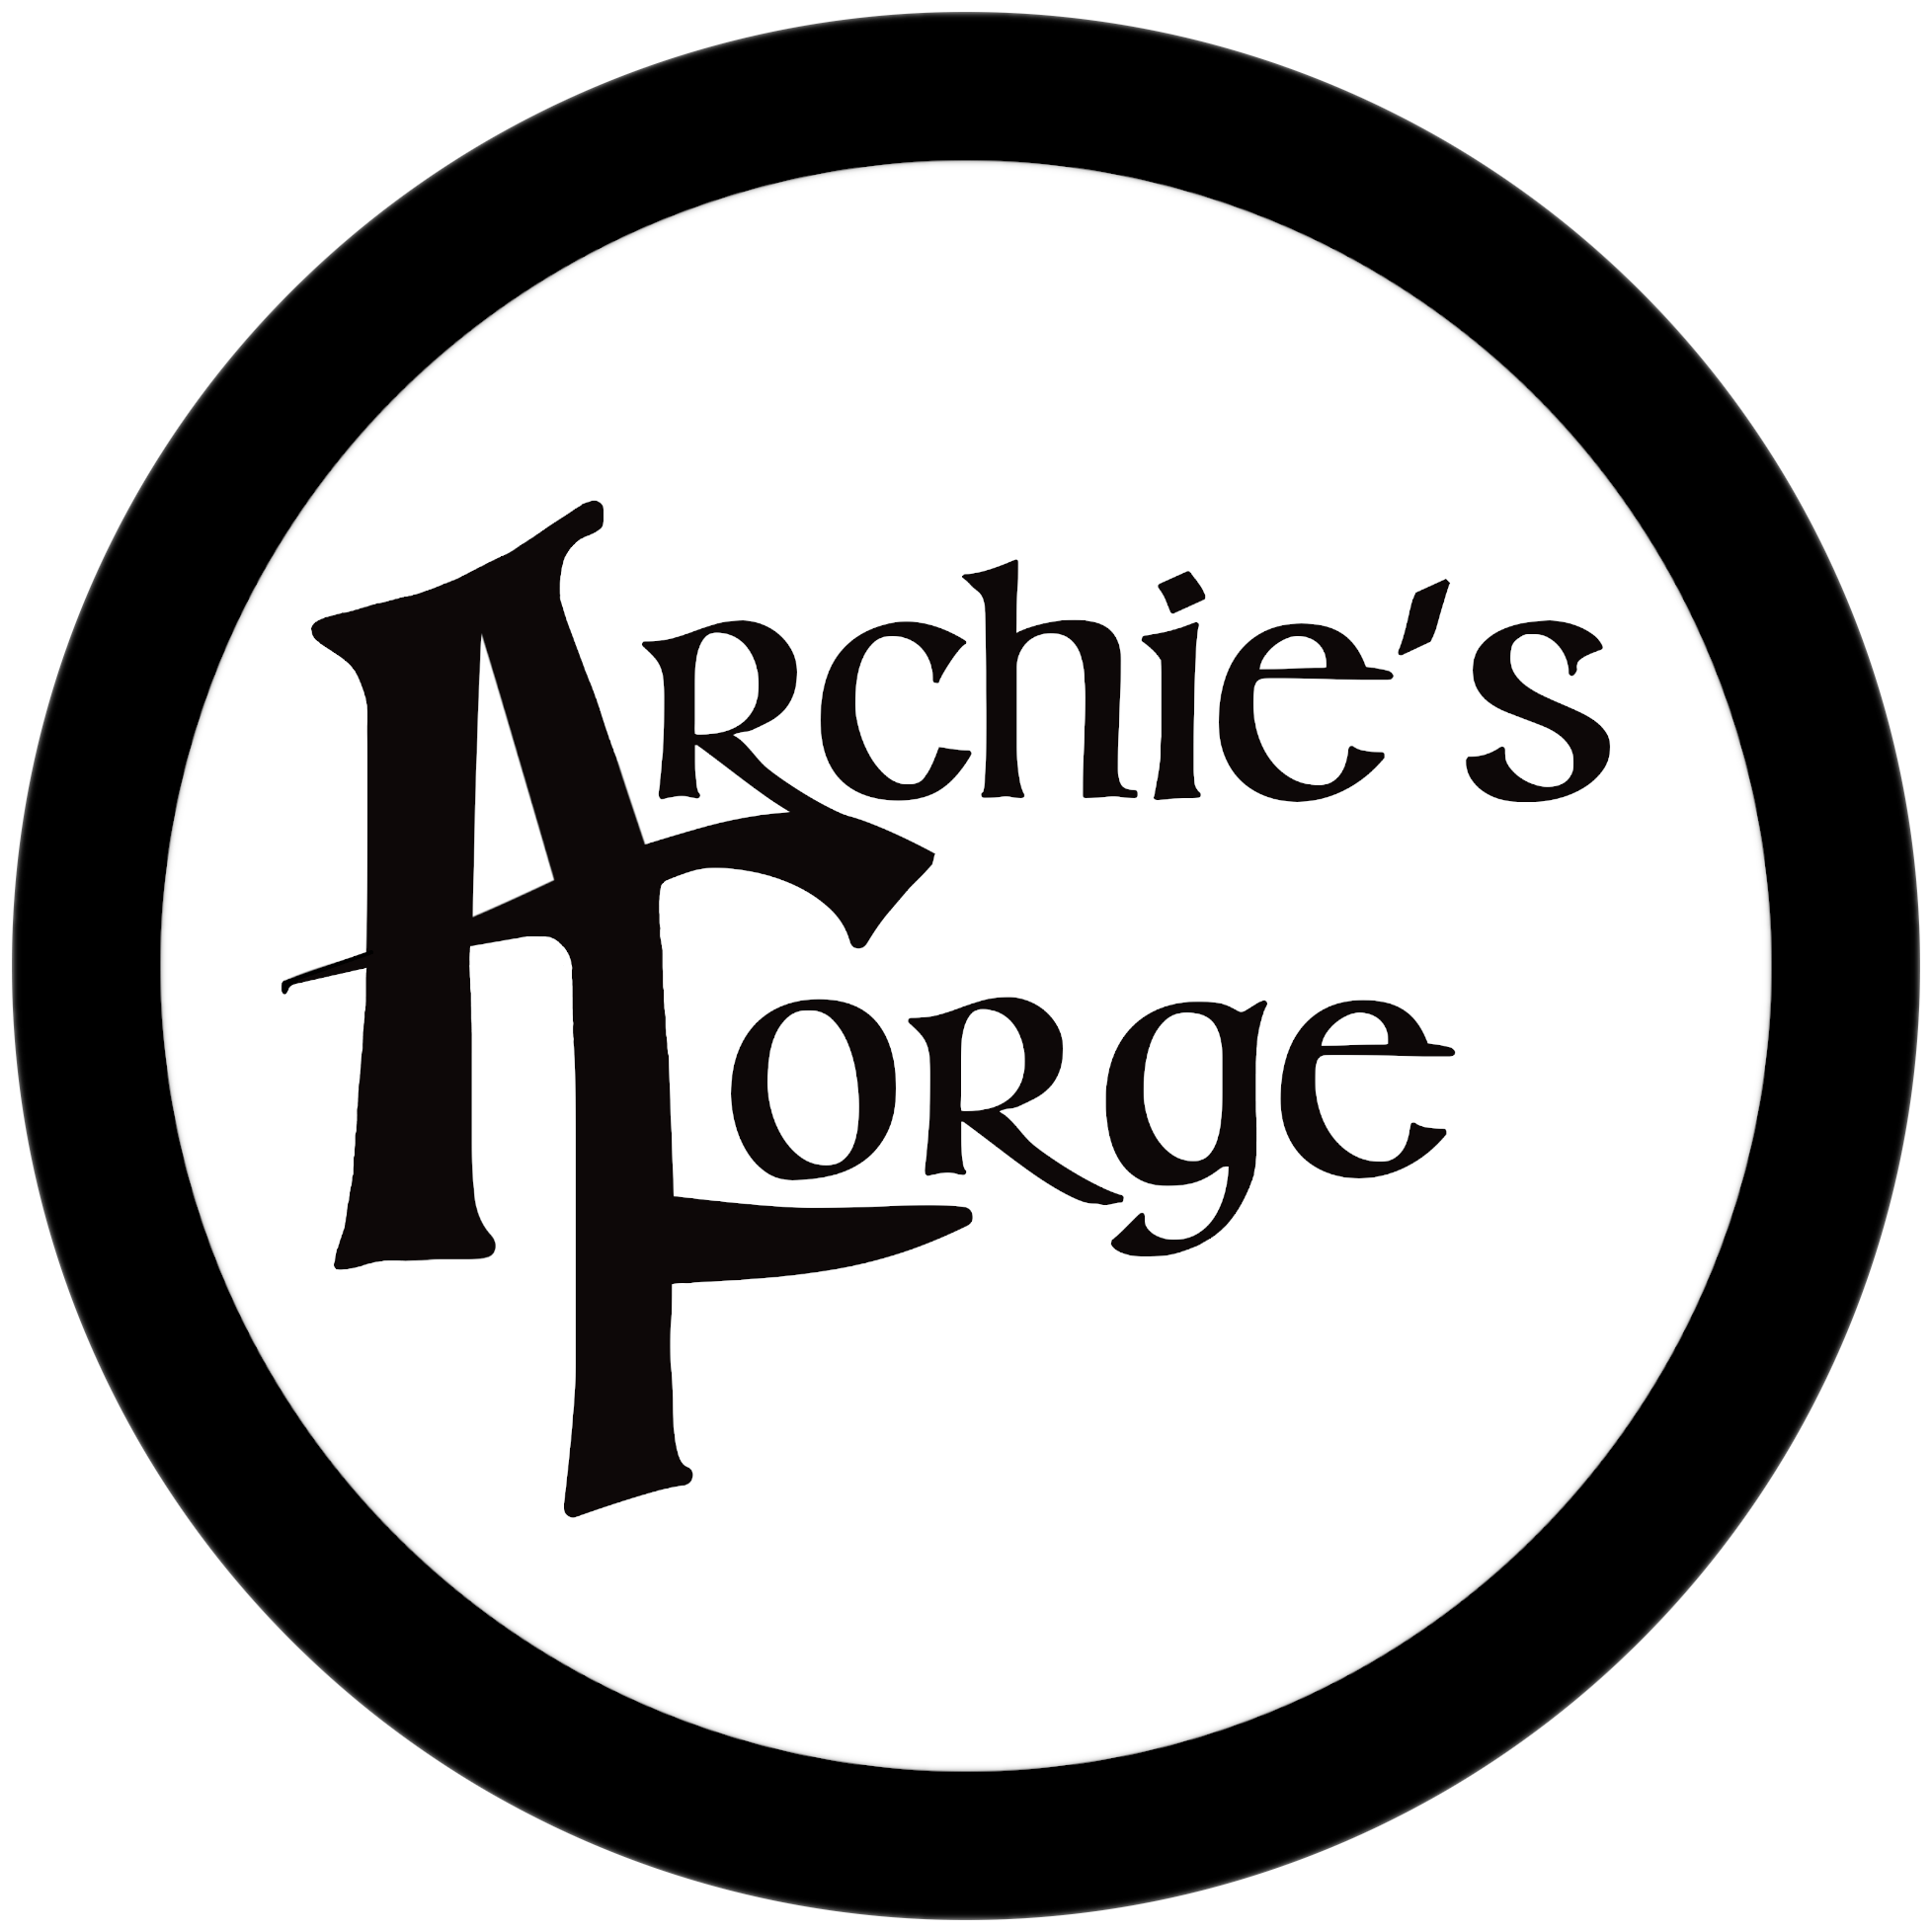 Archies Barbecue Logo - ocreations A Pittsburgh Design Firm